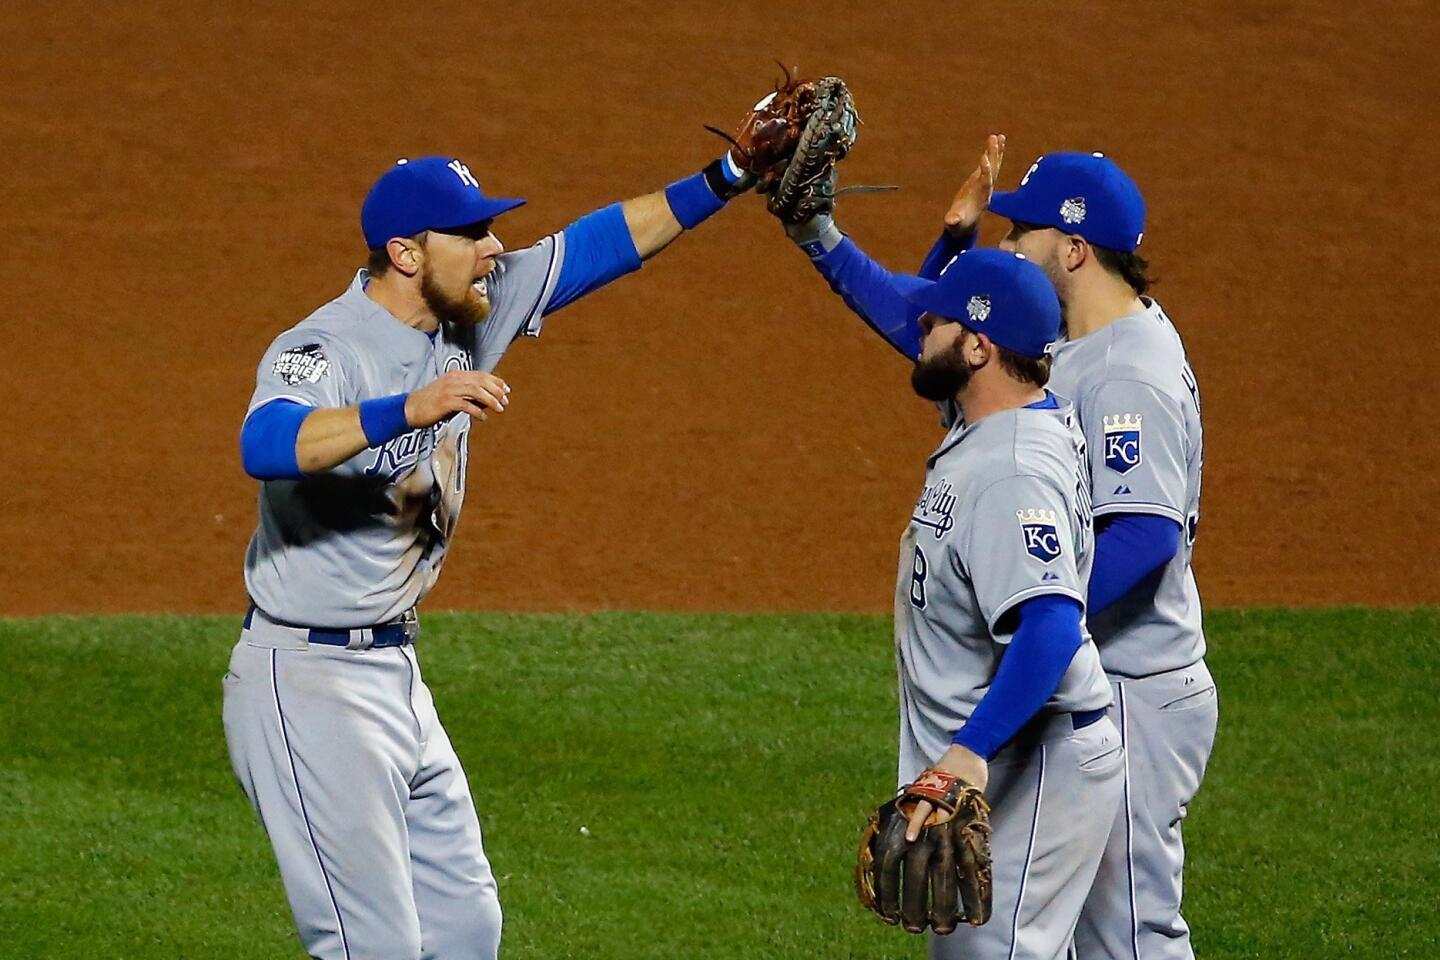 Mike Moustakas #8, Ben Zobrist #18 and Eric Hosmer #35 of the Kansas City Royals celebrate after defeating the New York Mets by a score of 5-3 to win Game Four of the 2015 World Series at Citi Field.